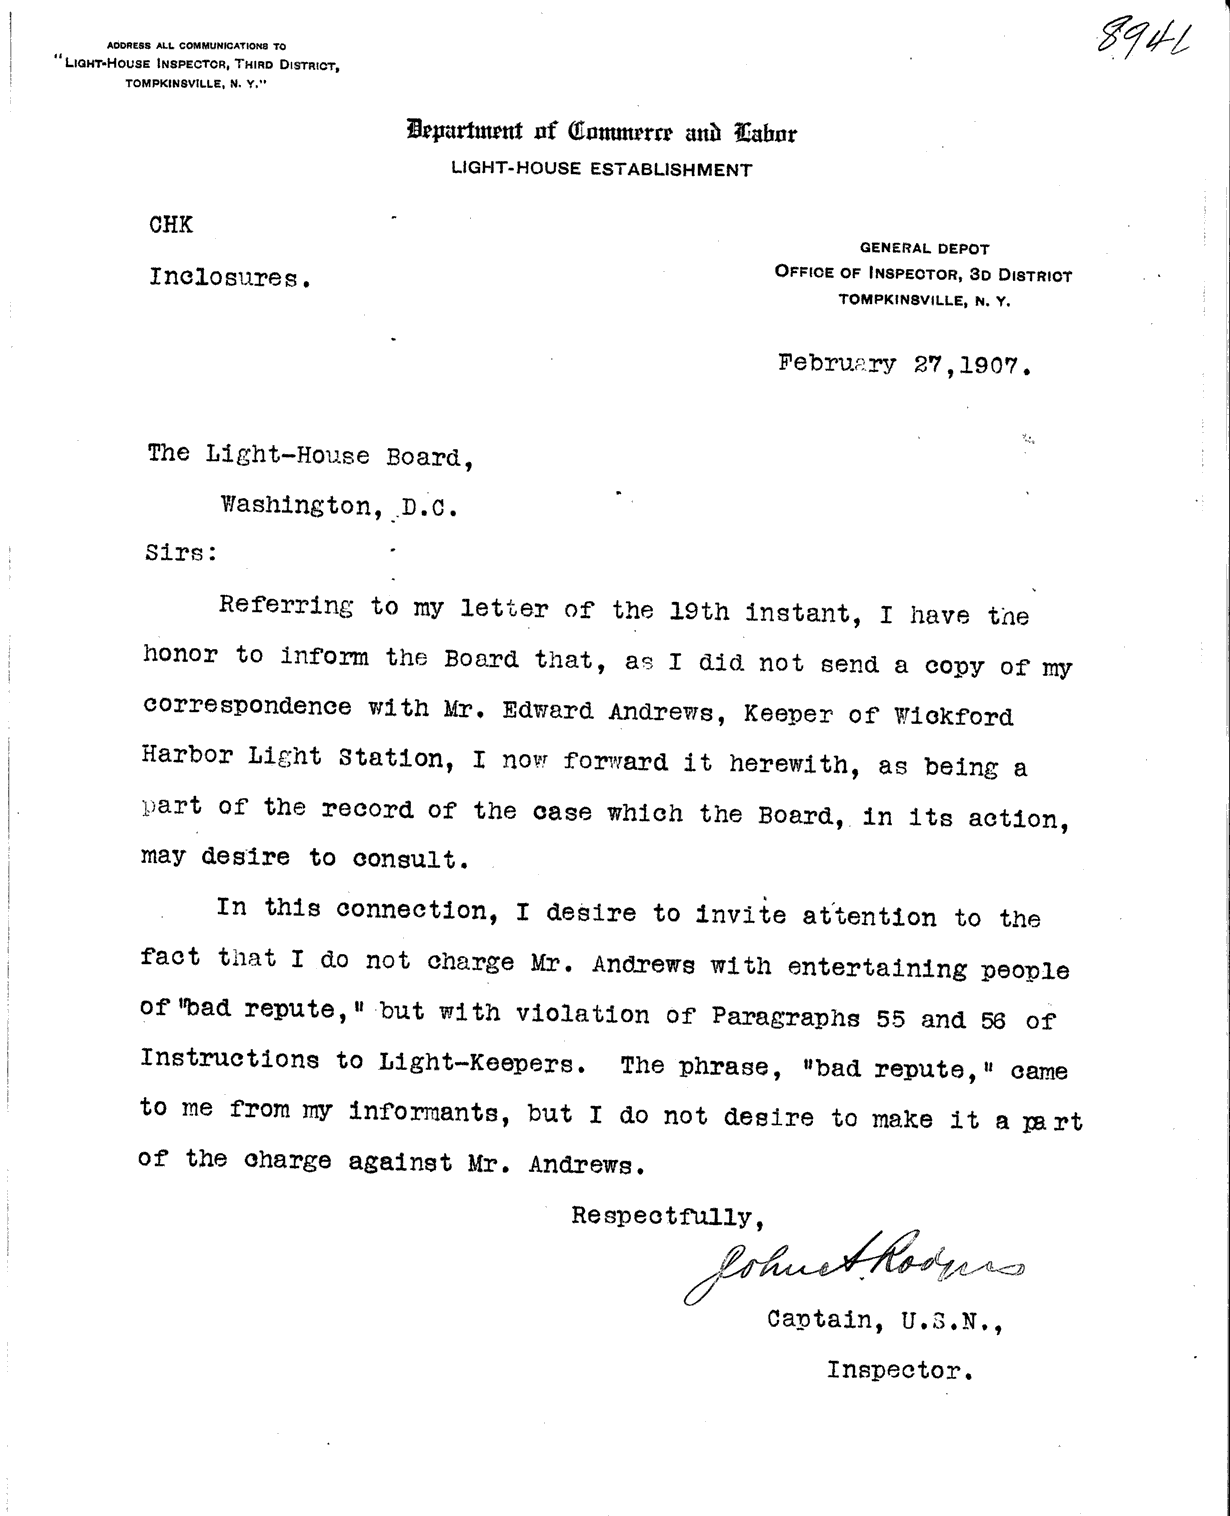 Wickford Harbor Light - Inspector's Letter to Light-house Board - page 3